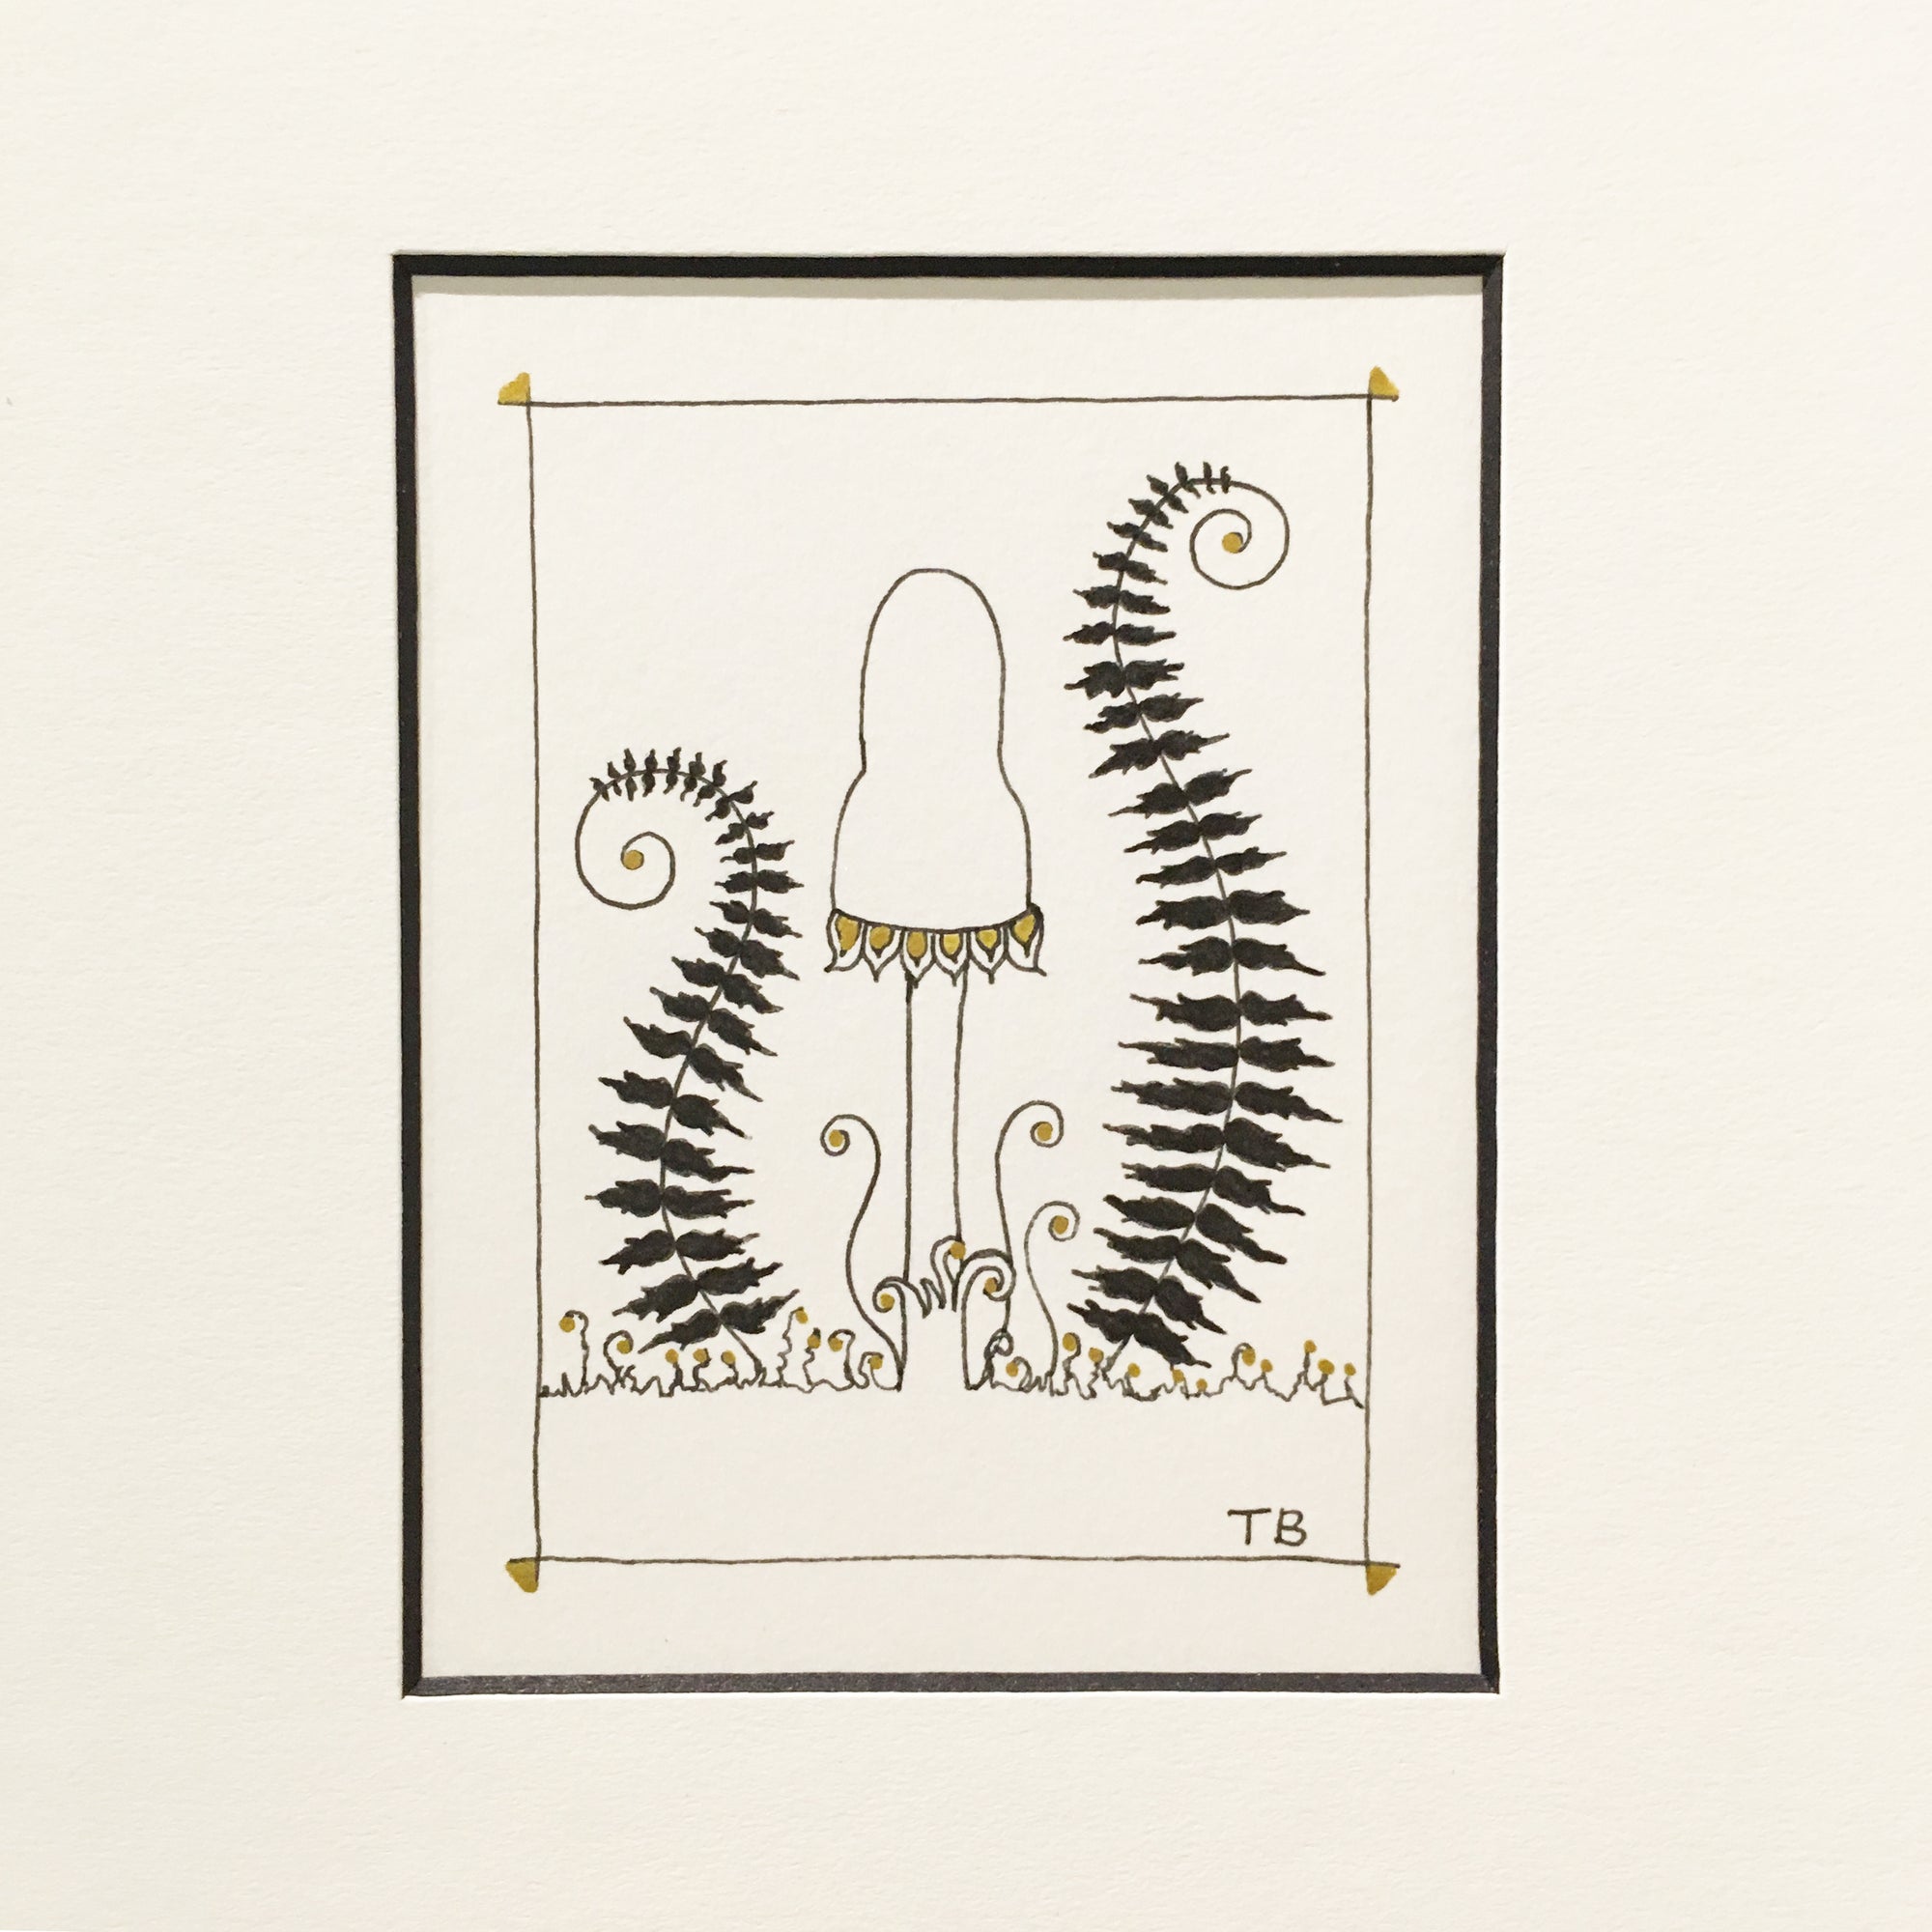 Pen and ink drawing with black and gold ink. mushroom and two ferns on each side reminiscent of a Greek Lyre instrument.